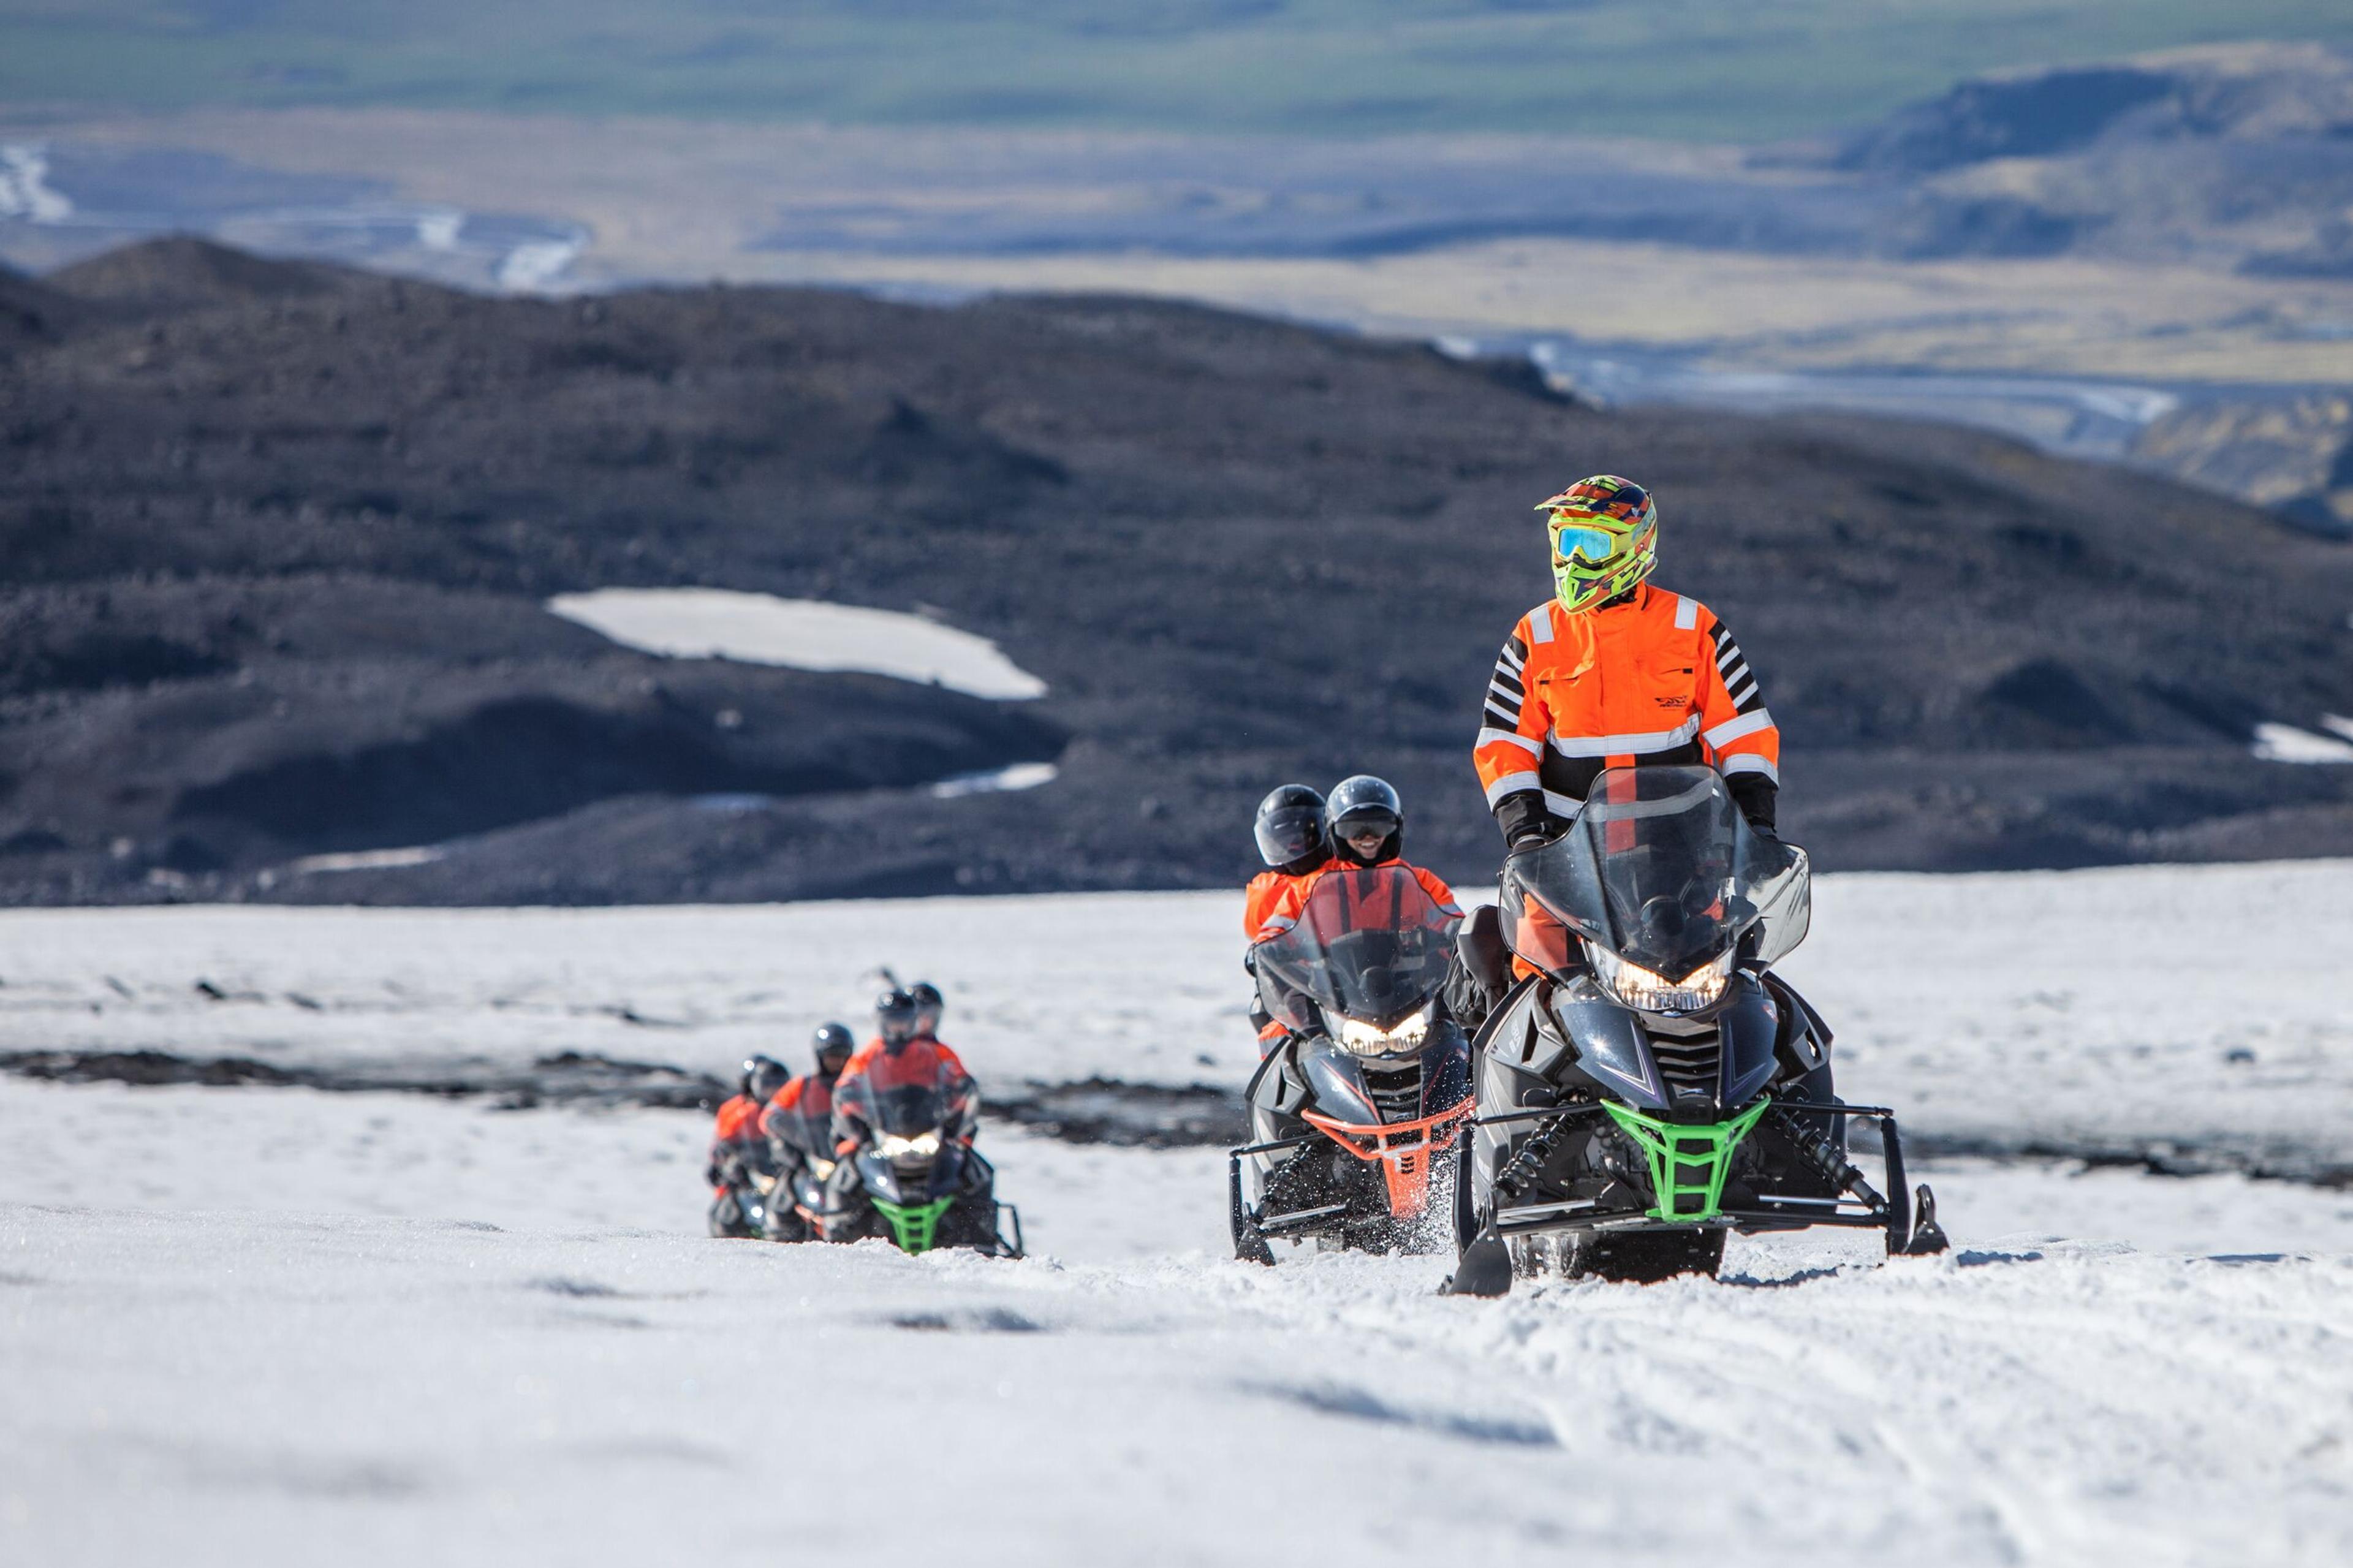 Group of people riding snowmobiles on Mýrdalsjökull Glacier in Iceland